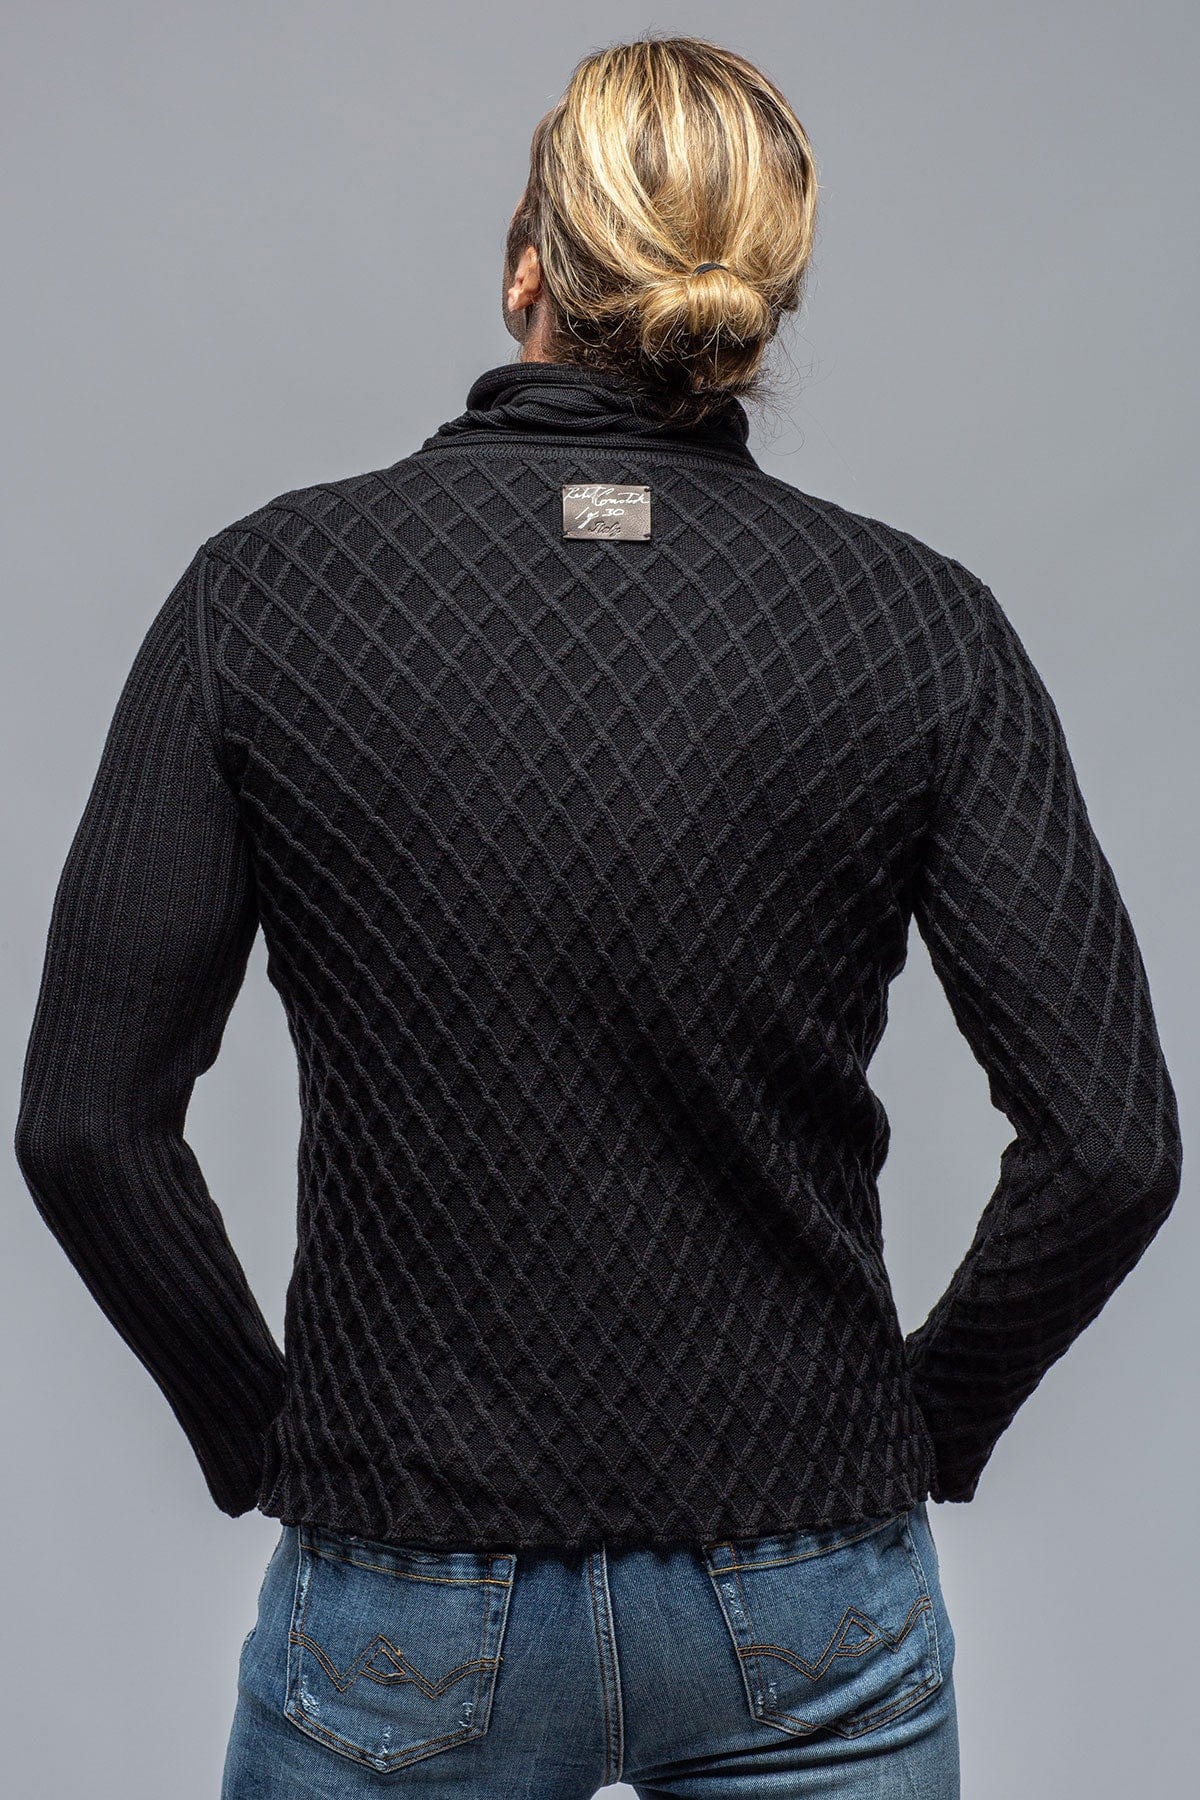 Sanora Crossover Cowl Neck Sweater In Black - AXEL'S